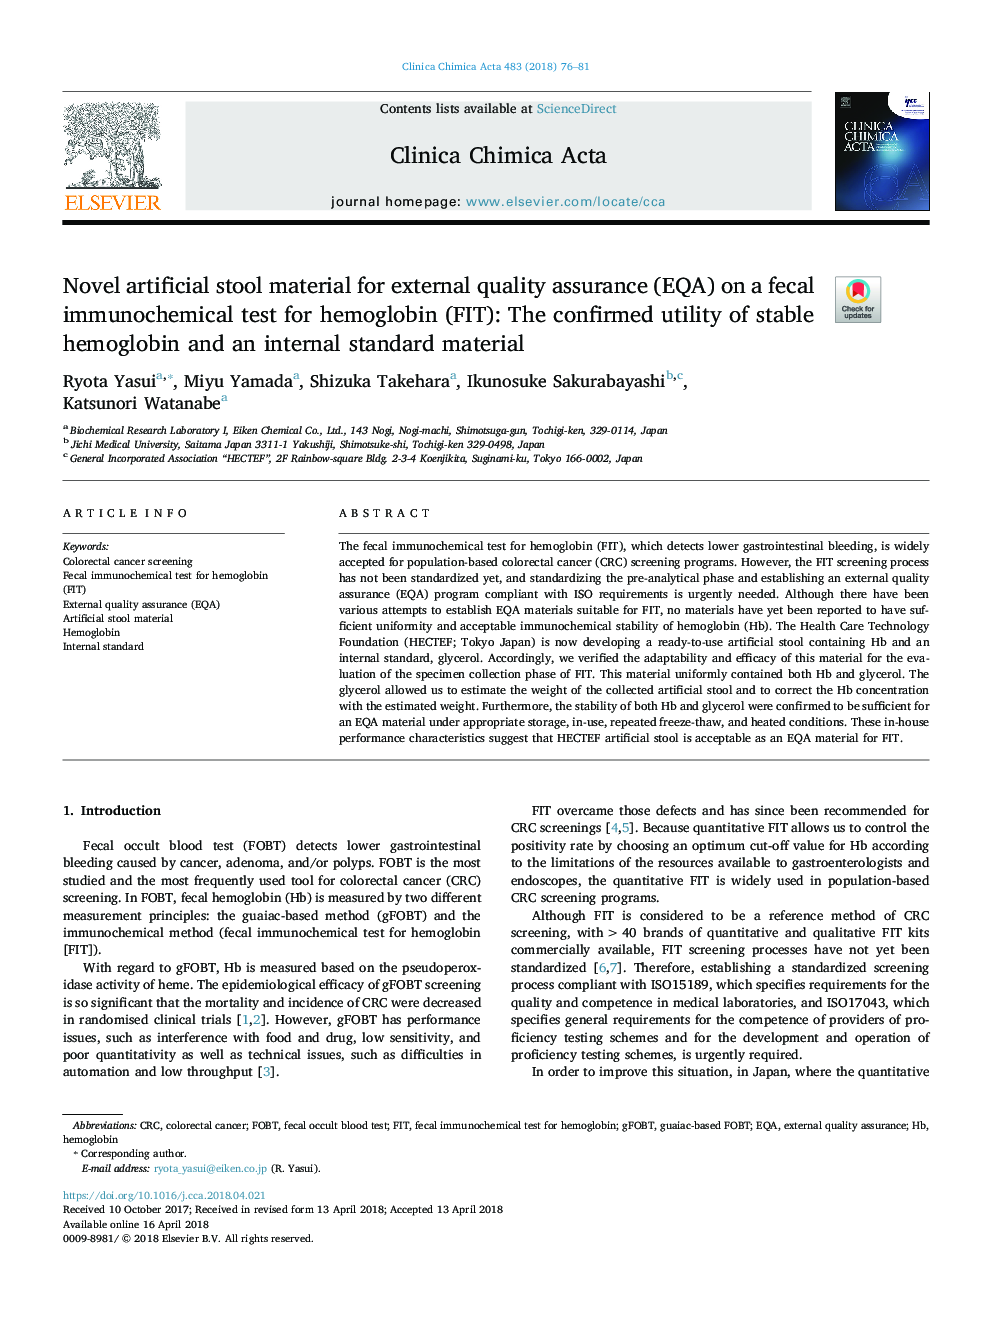 Novel artificial stool material for external quality assurance (EQA) on a fecal immunochemical test for hemoglobin (FIT): The confirmed utility of stable hemoglobin and an internal standard material